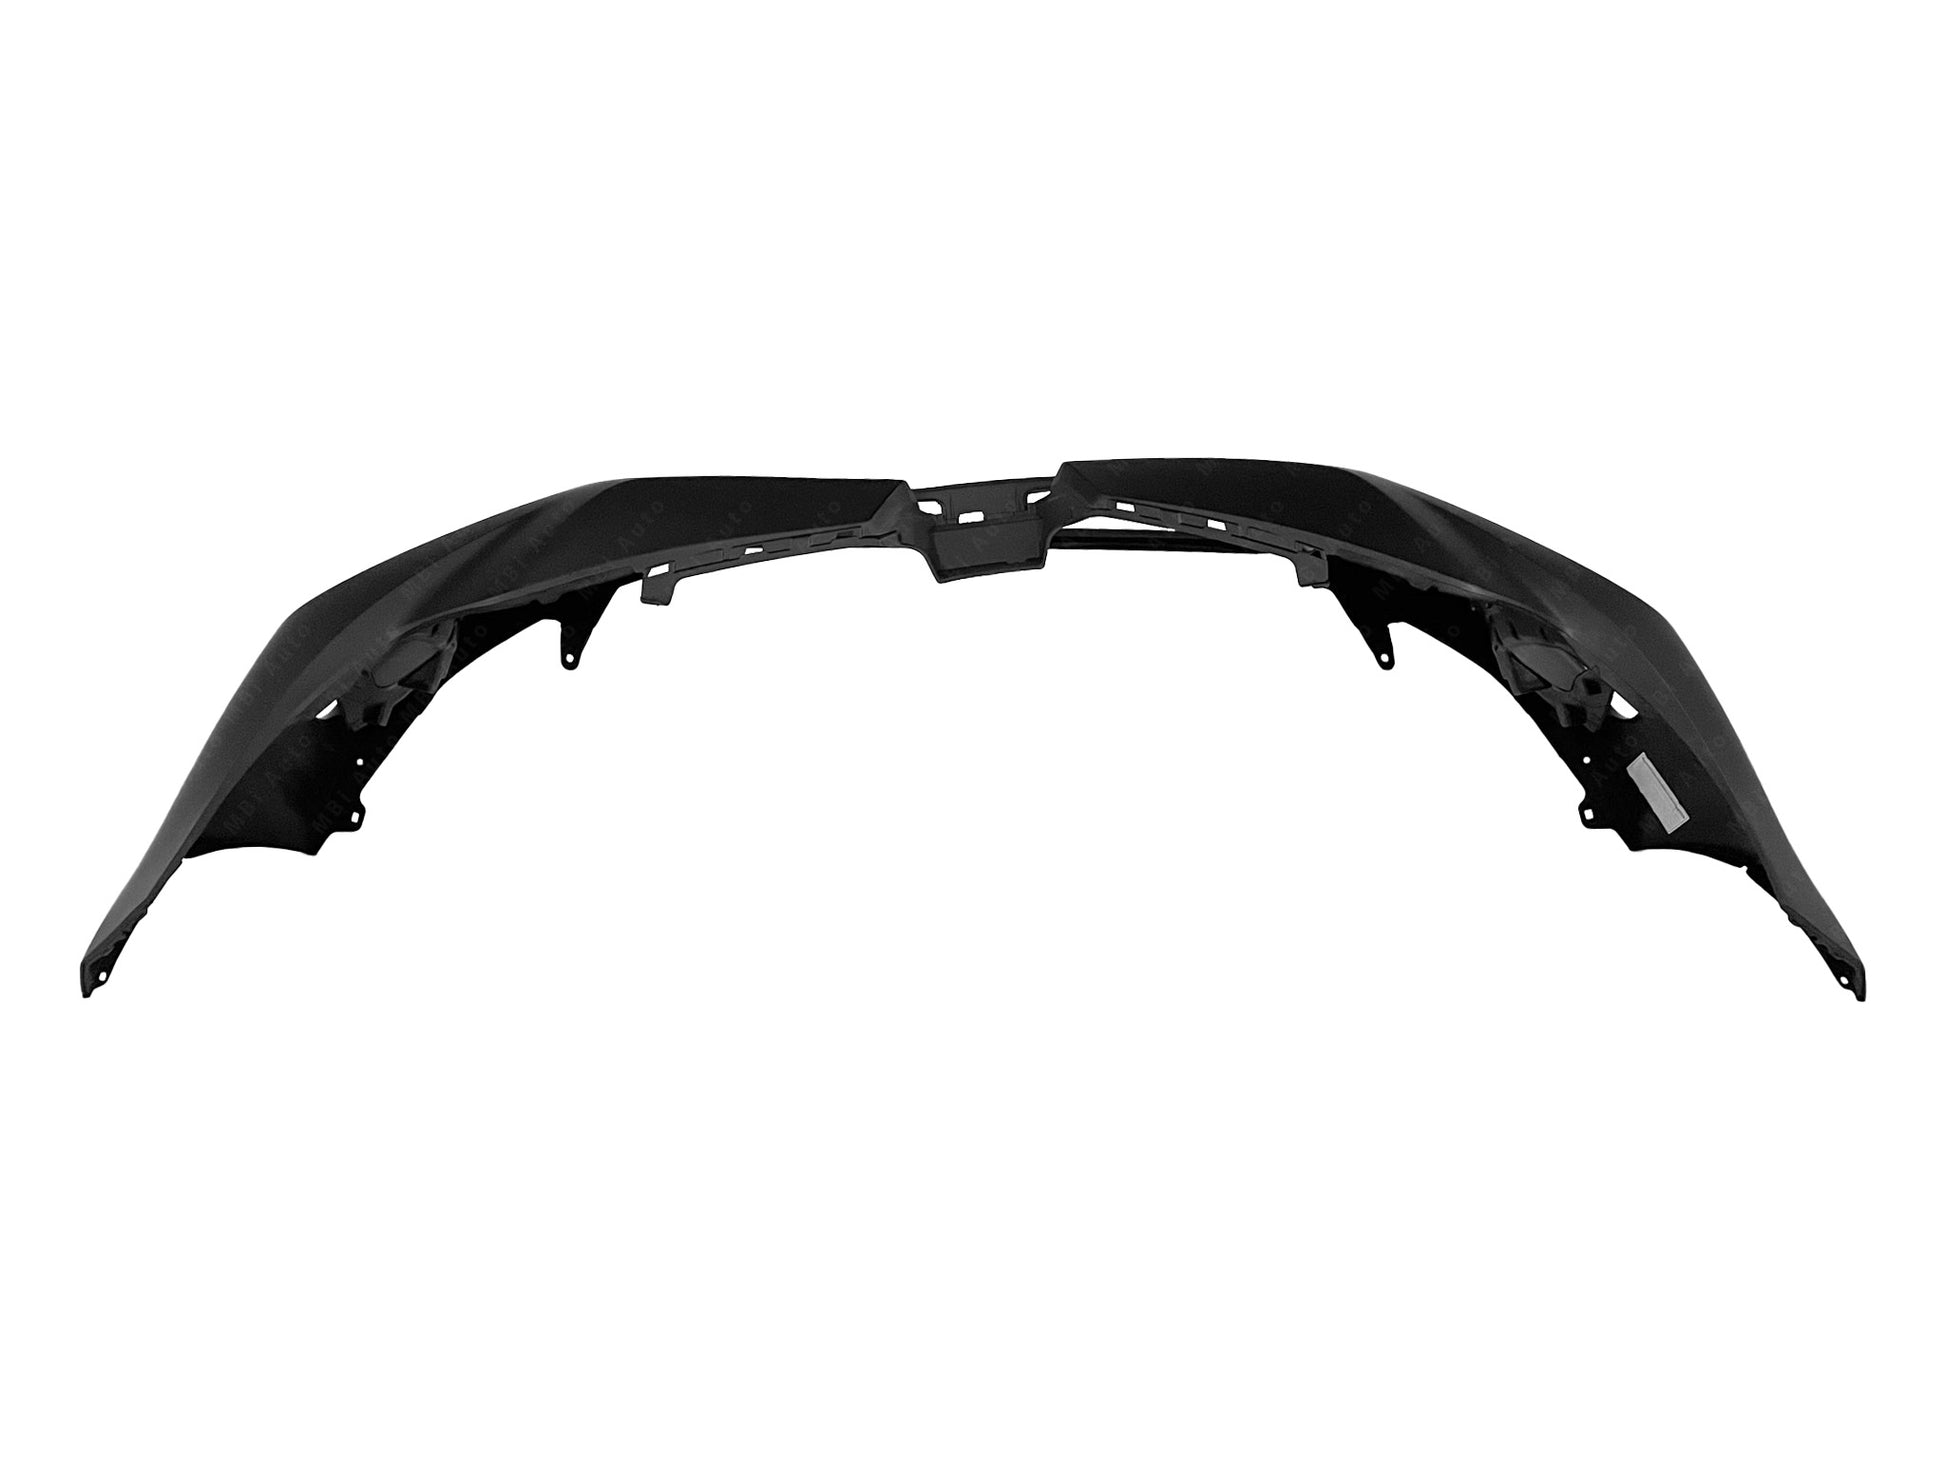 Toyota Corolla 2017 - 2019 Front Bumper Cover 17 - 19 TO1000424 Bumper-King